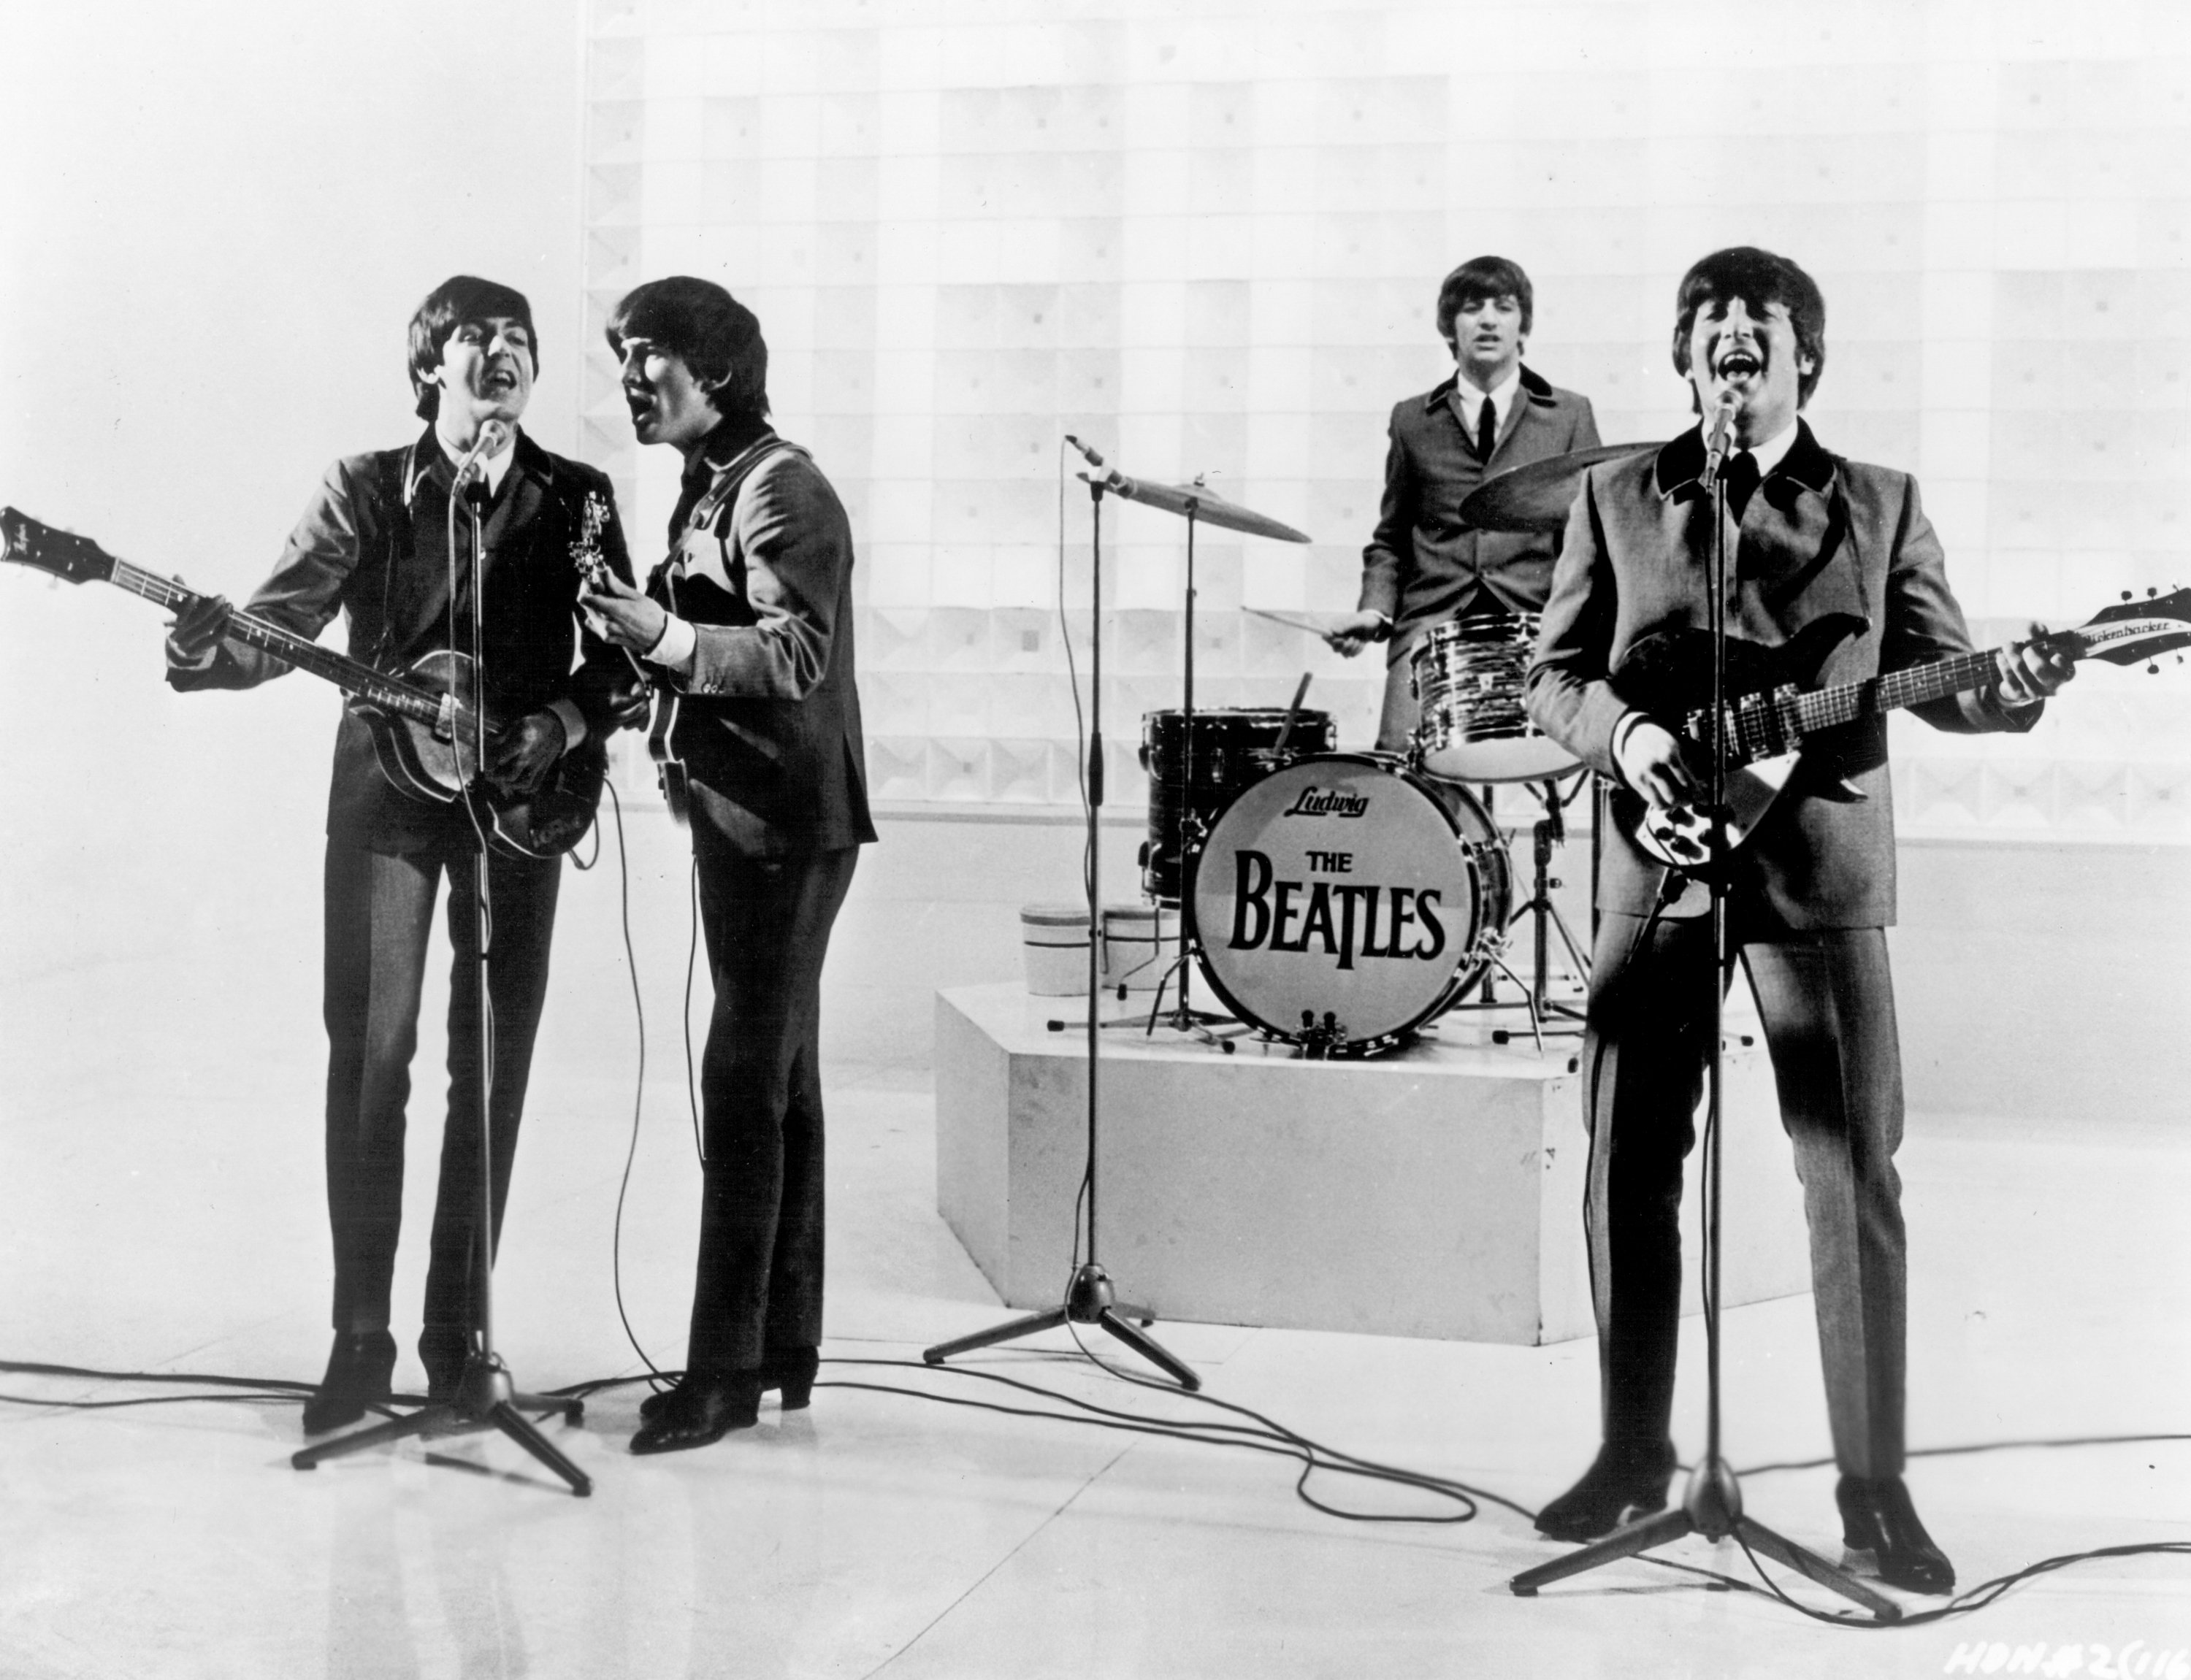 The Beatles on a stage